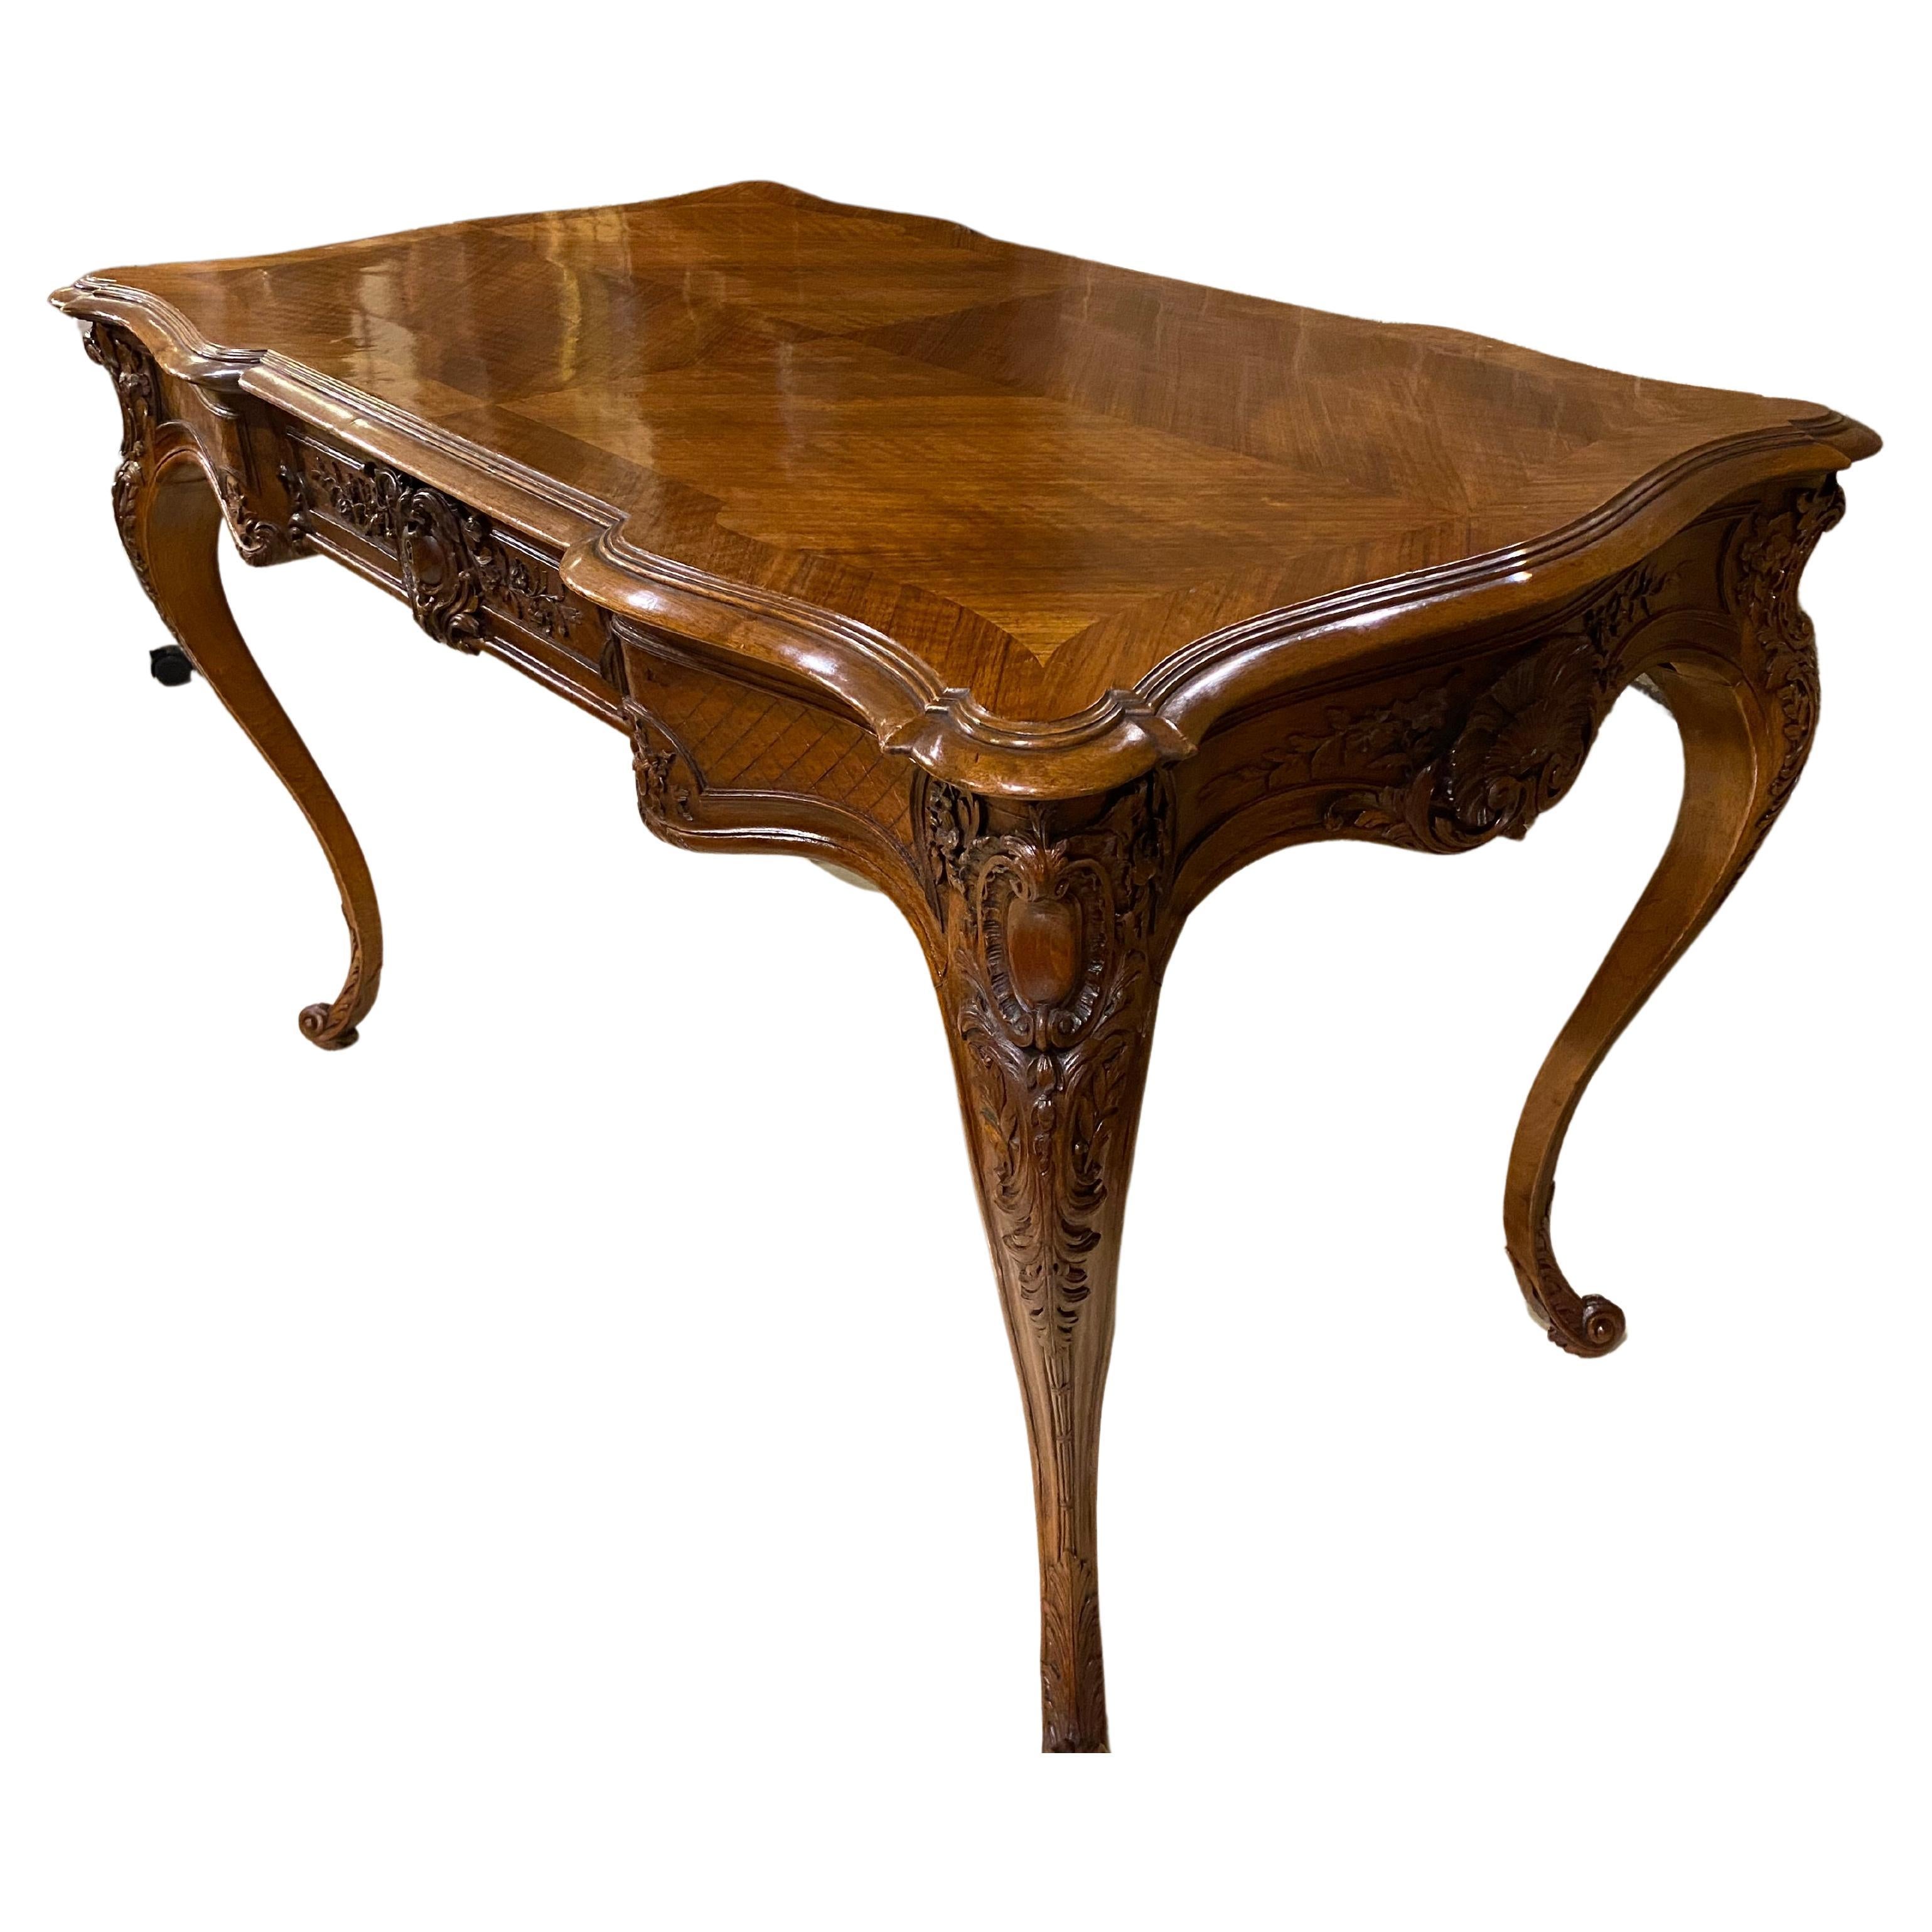 19th Century French Walnut Writing Table Desk, Cabriole Legs Banded Top, Drawer For Sale